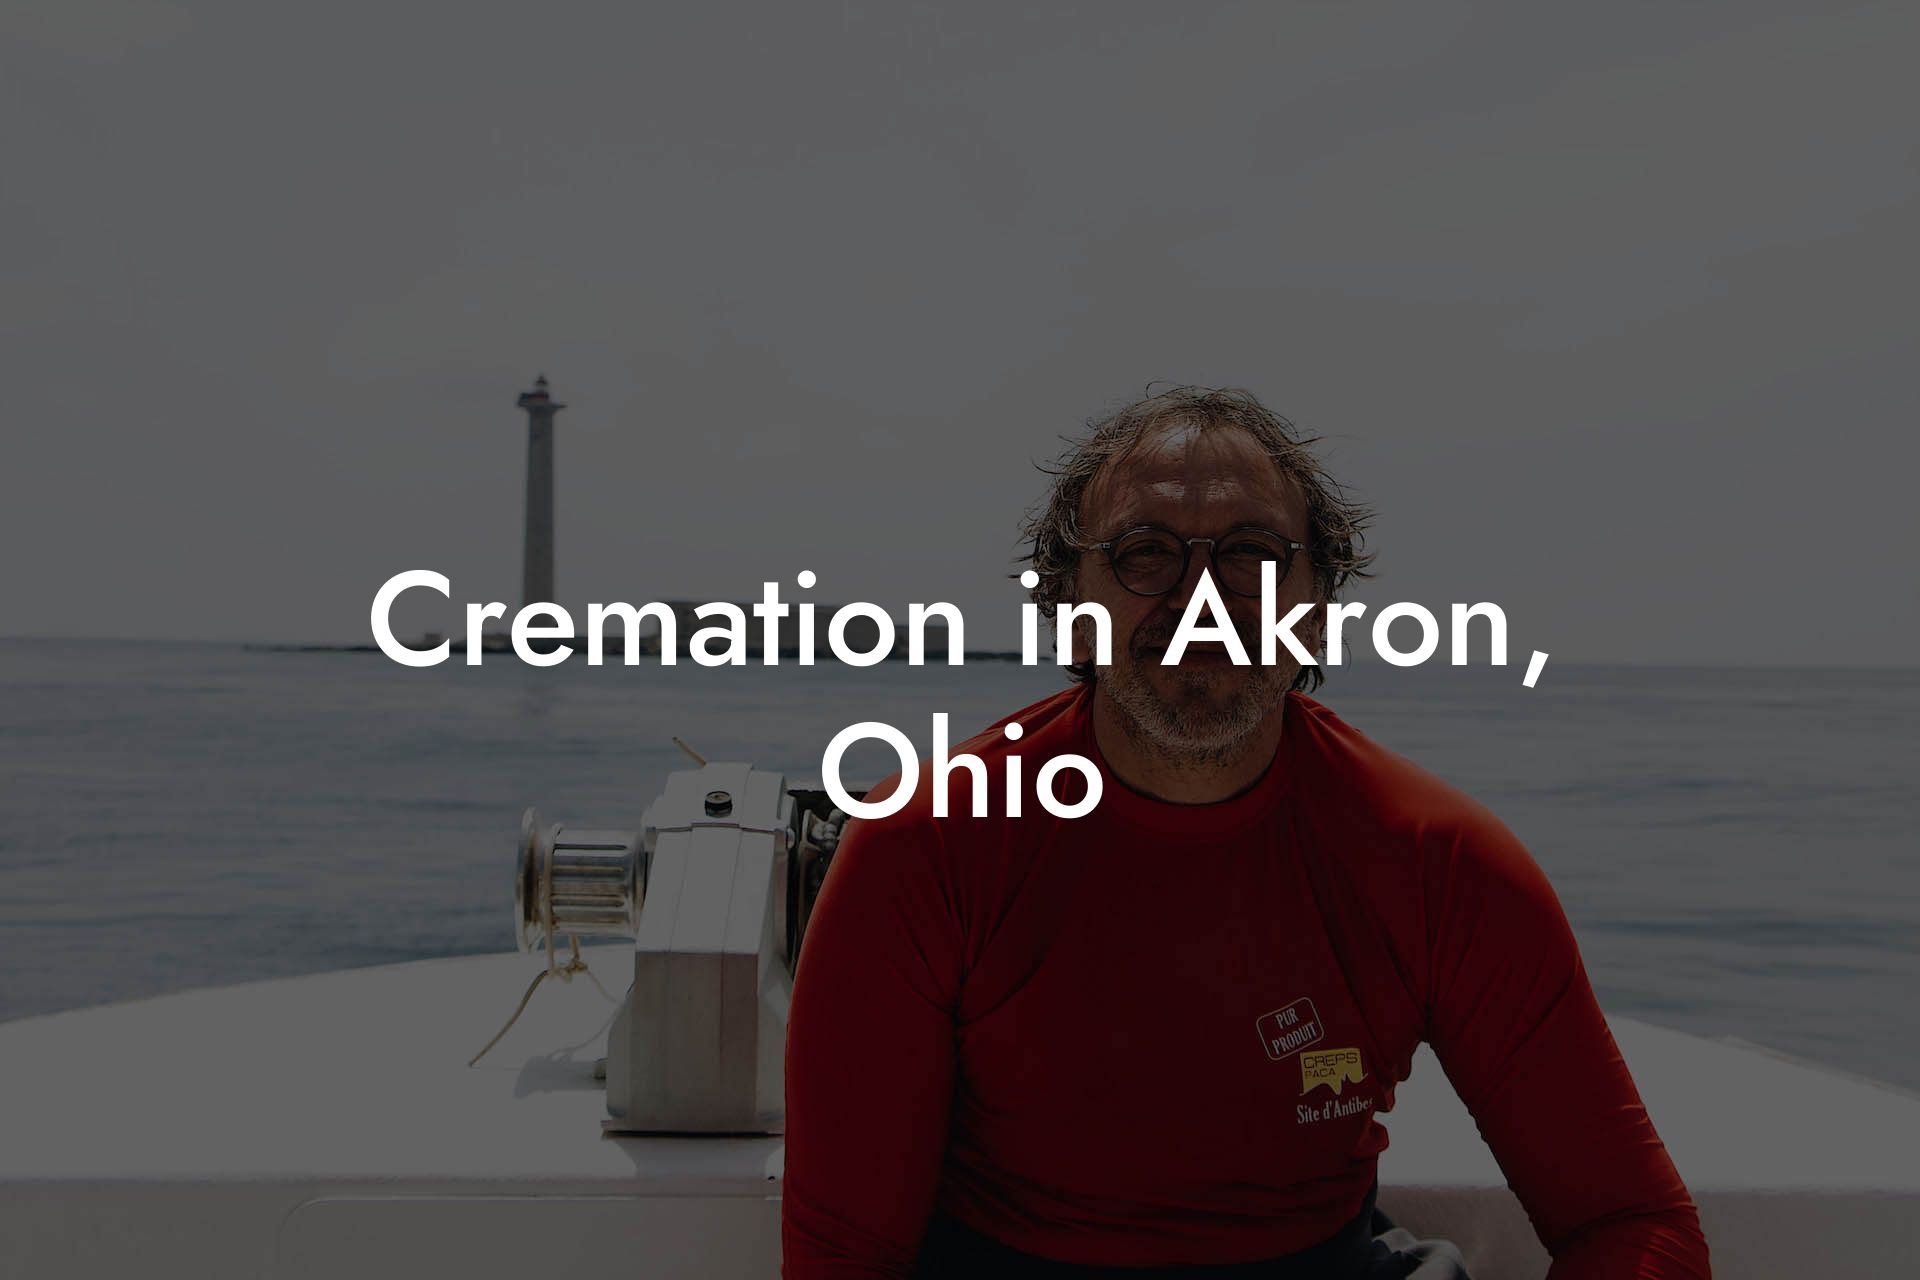 Cremation in Akron, Ohio